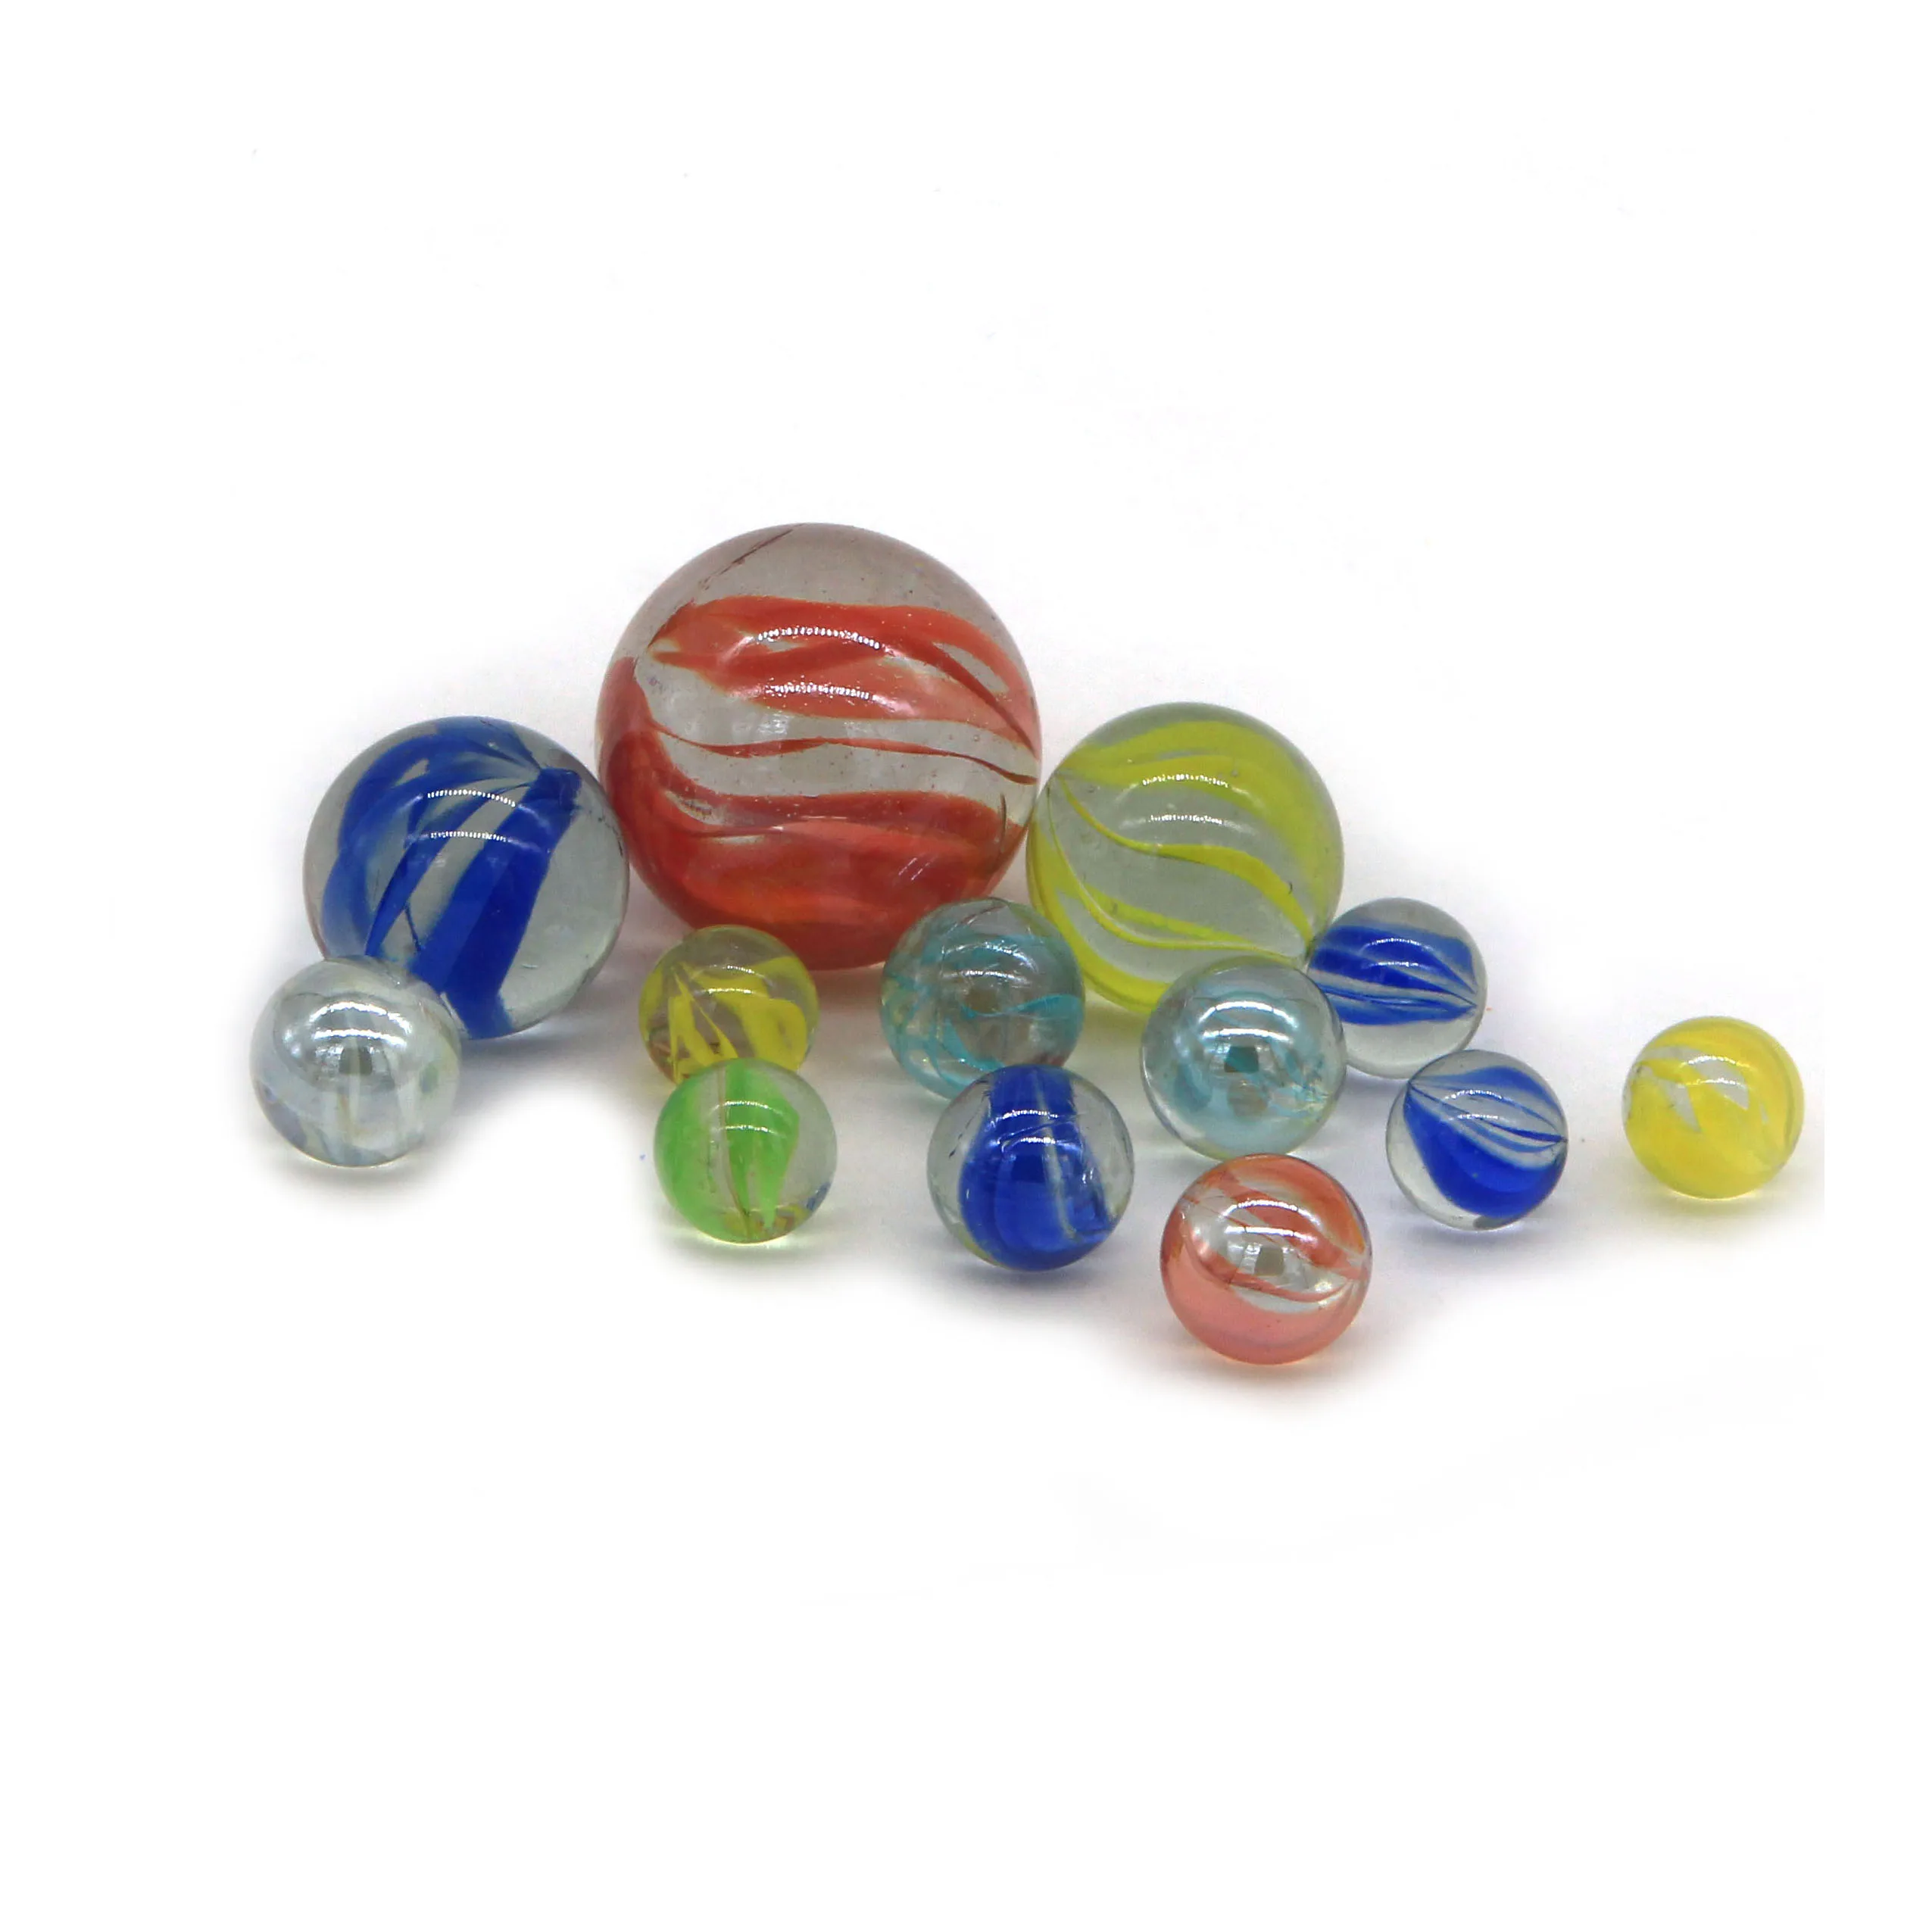 toy cats eye classic play glass marbles glass playing marbles,round 